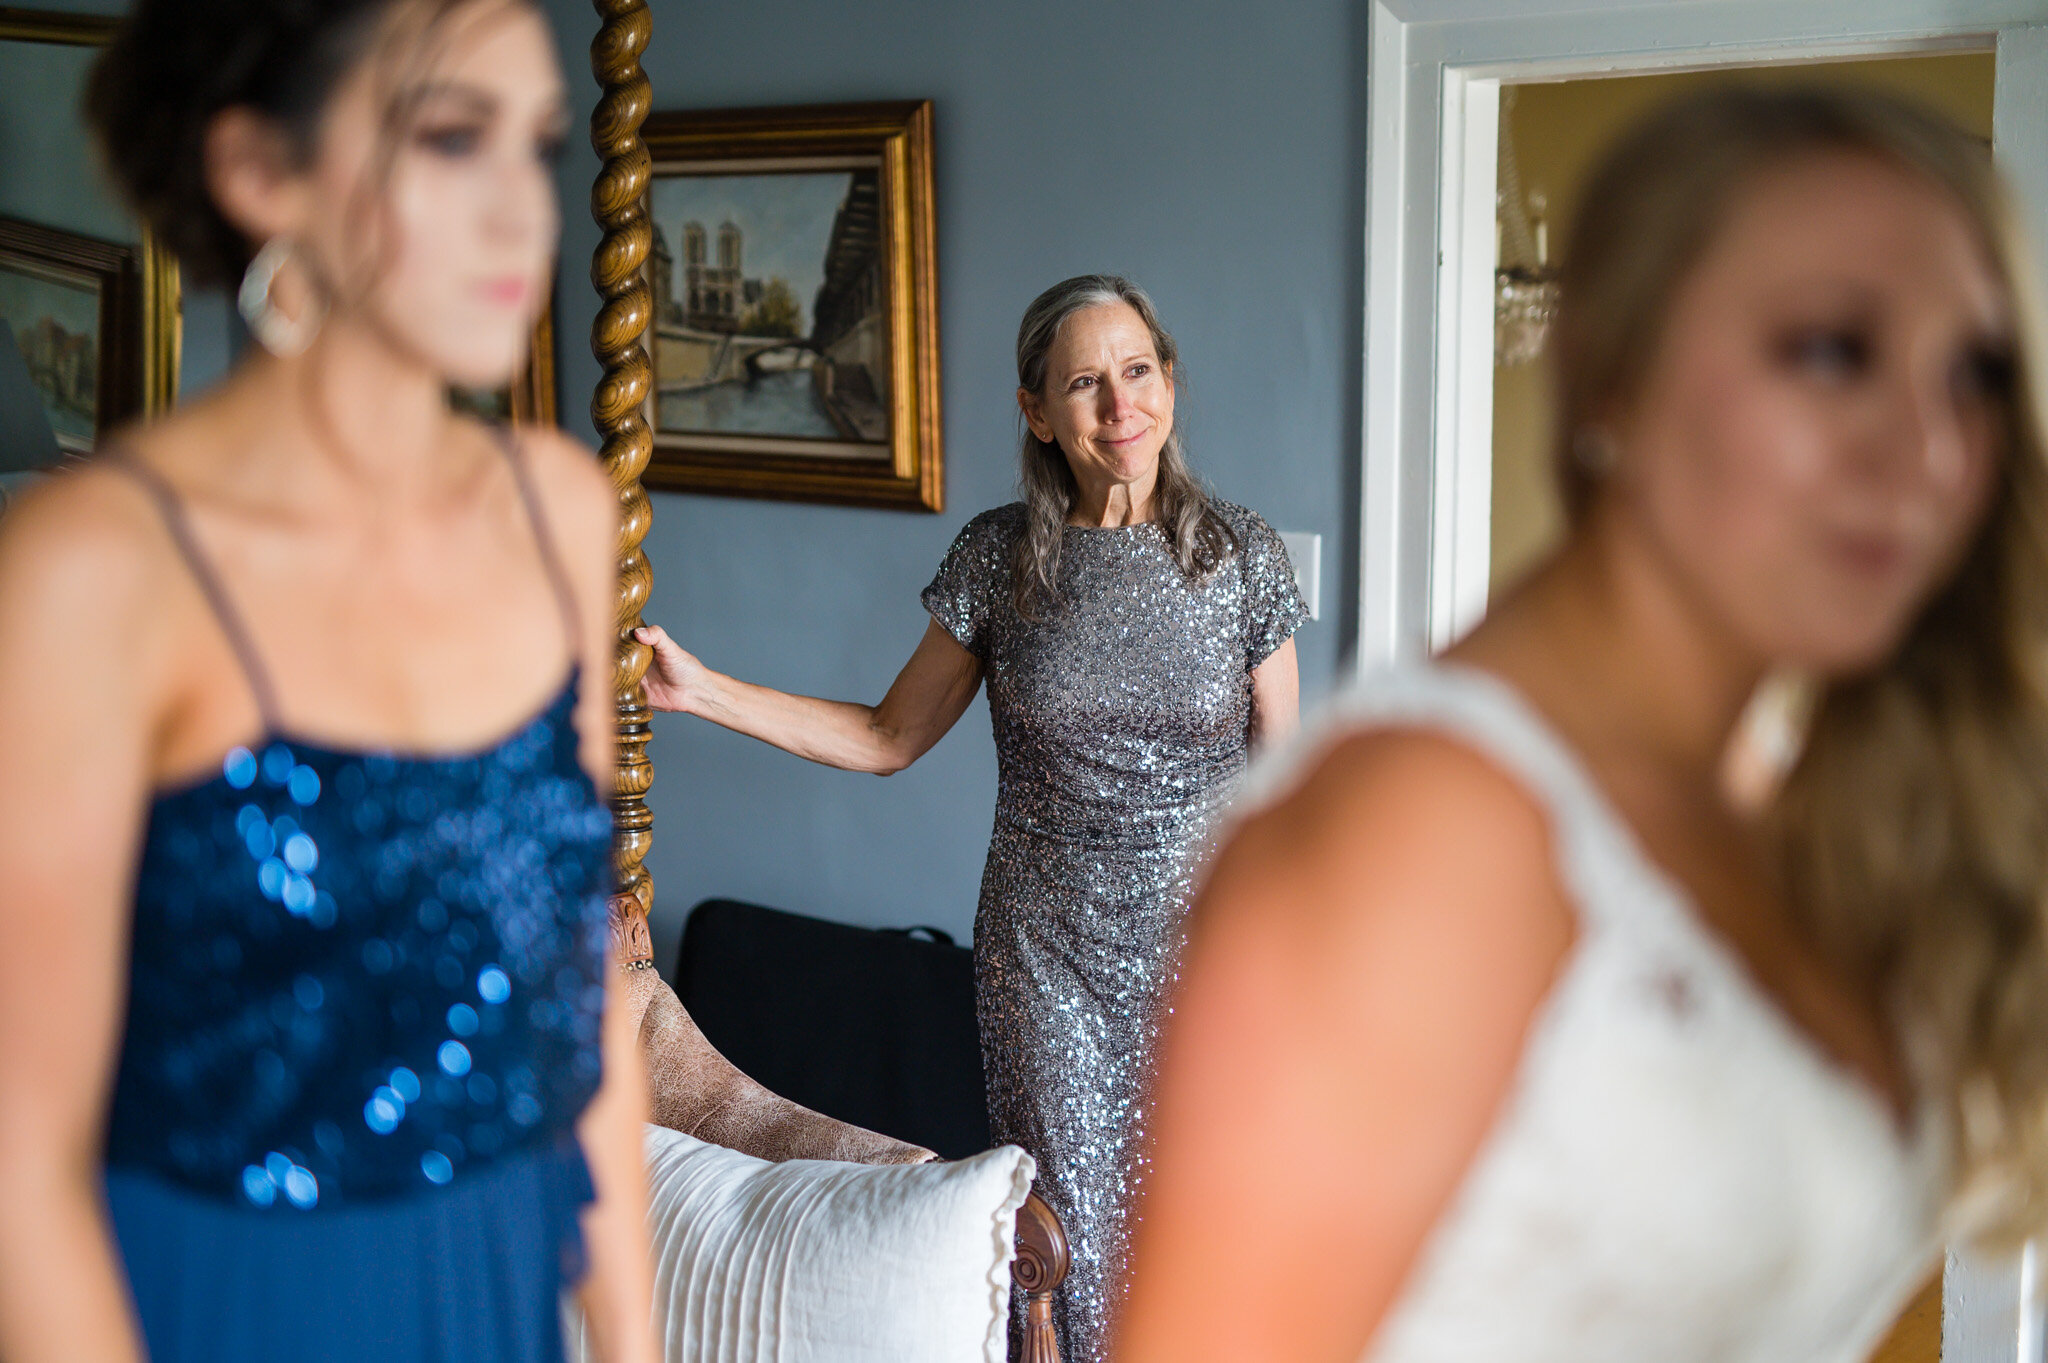 Mom looks at her daughter finishing her wedding preparations